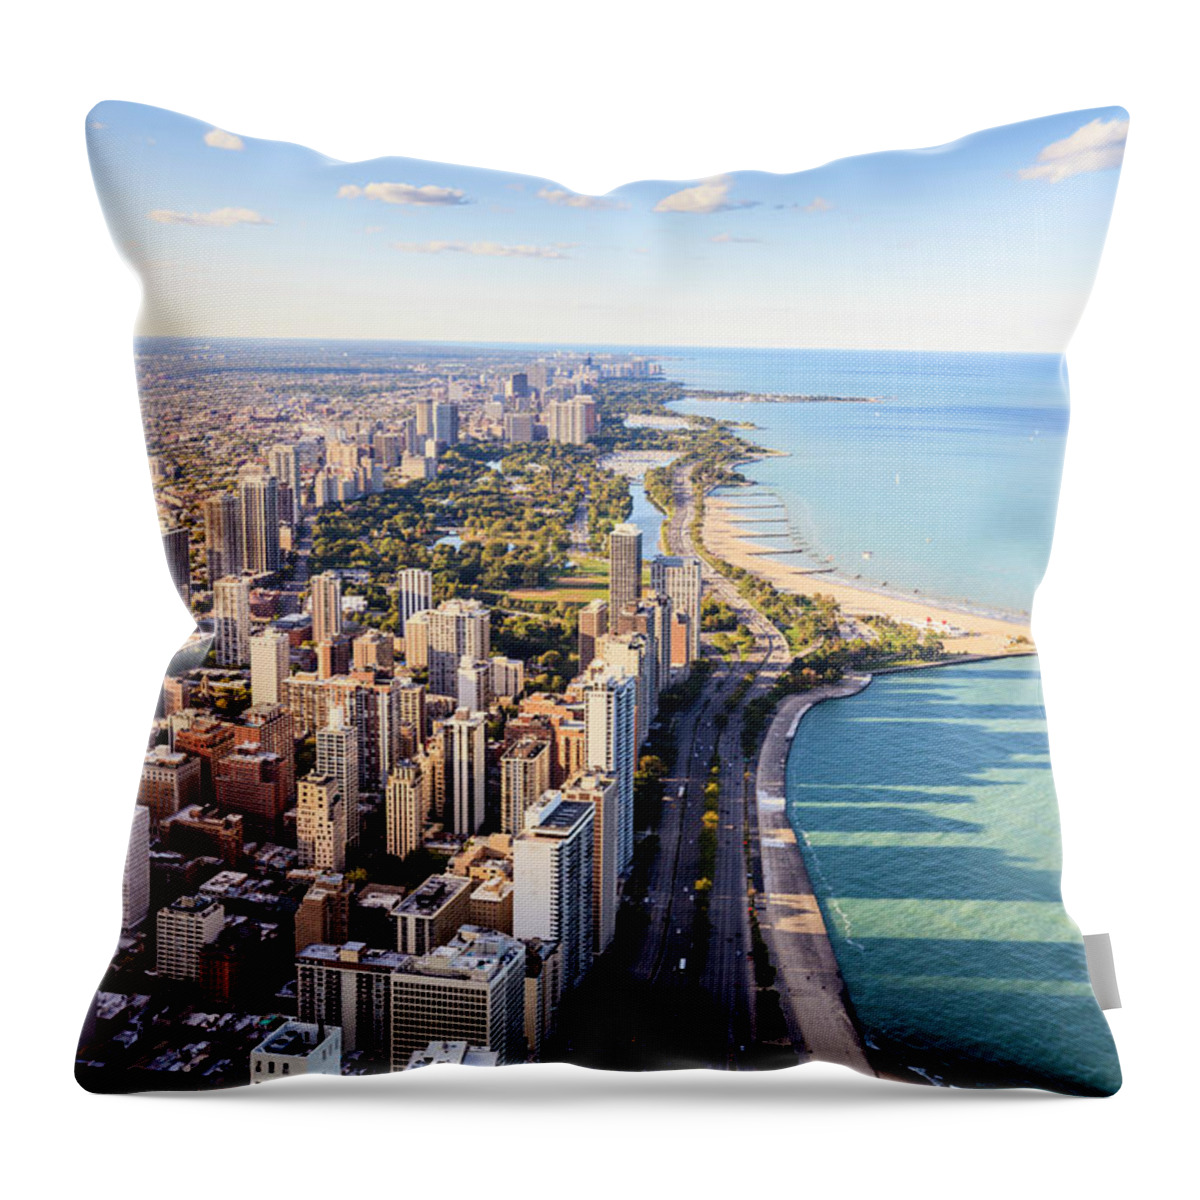 Water's Edge Throw Pillow featuring the photograph Chicago Lakefront Skyline by Fraser Hall